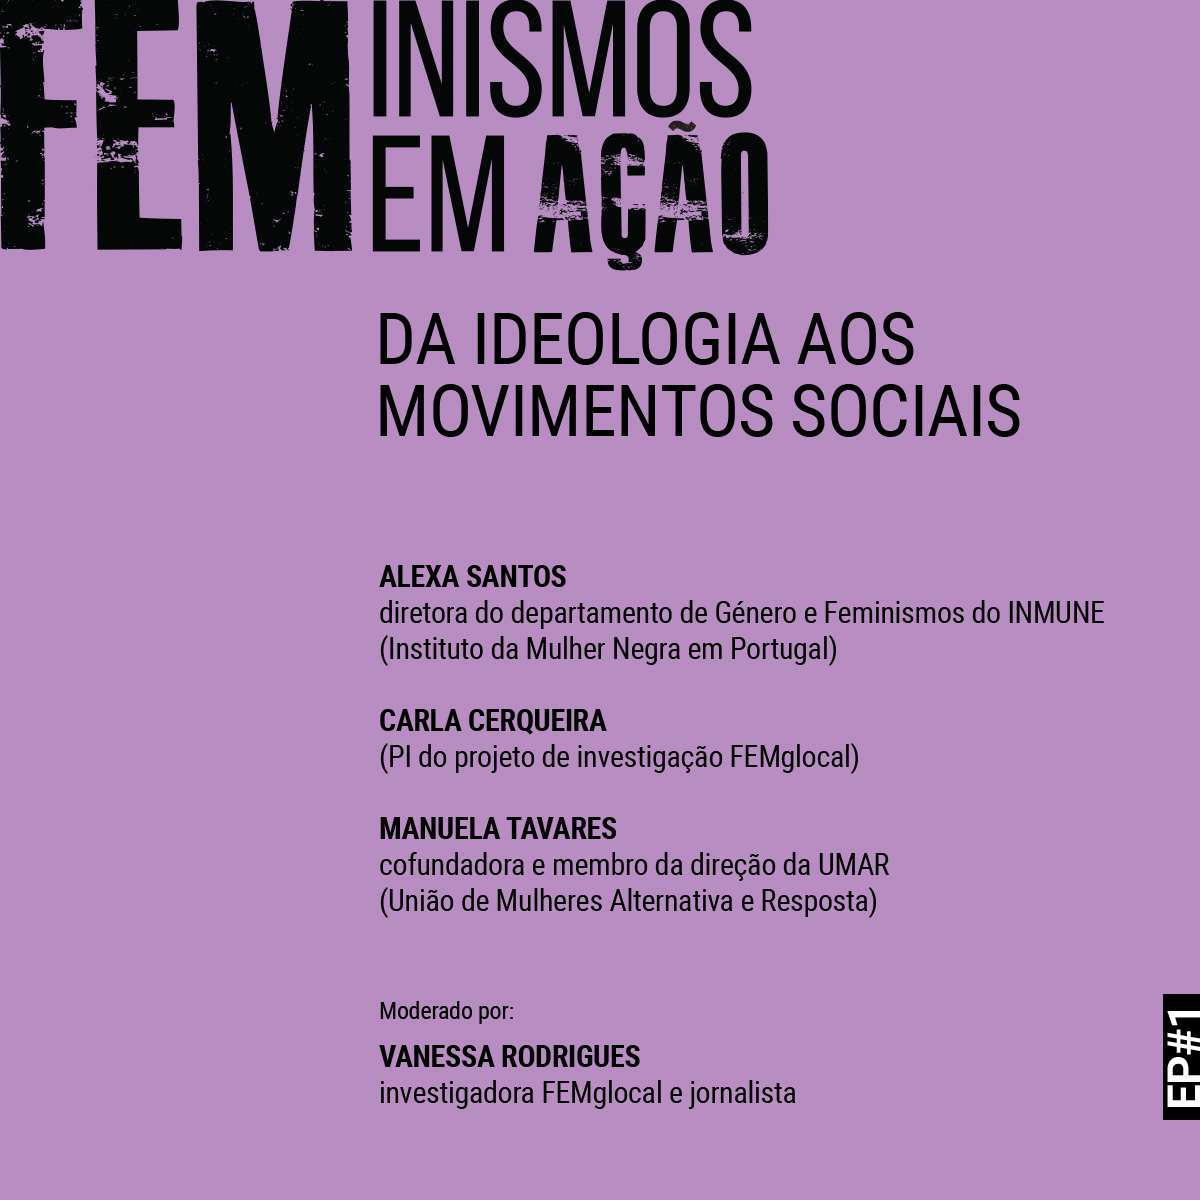 Feminisms in Action: from ideology to social movements